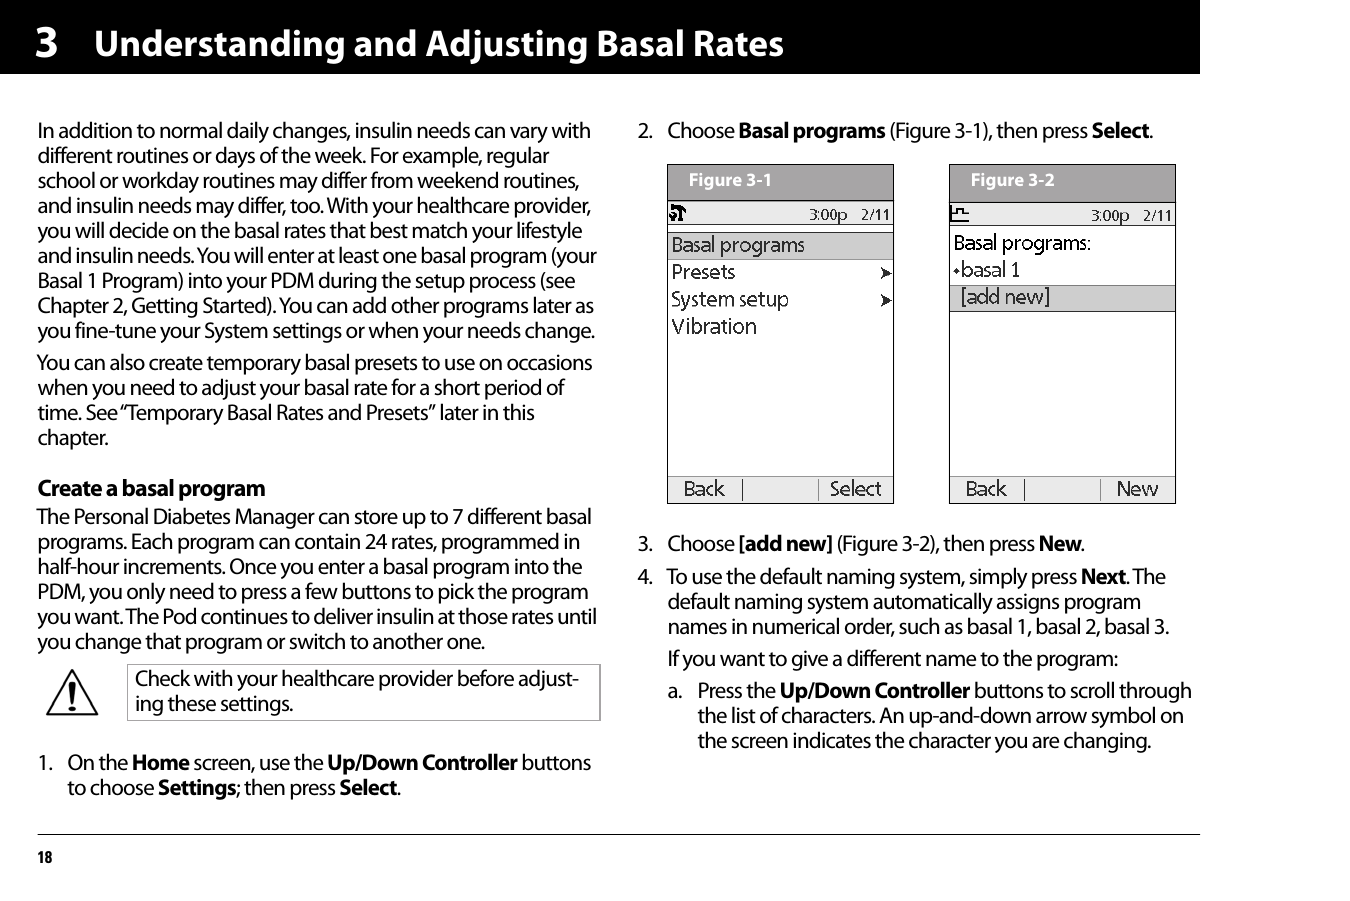 Understanding and Adjusting Basal Rates183In addition to normal daily changes, insulin needs can vary with different routines or days of the week. For example, regular school or workday routines may differ from weekend routines, and insulin needs may differ, too. With your healthcare provider, you will decide on the basal rates that best match your lifestyle and insulin needs. You will enter at least one basal program (your Basal 1 Program) into your PDM during the setup process (see Chapter 2, Getting Started). You can add other programs later as you fine-tune your System settings or when your needs change.You can also create temporary basal presets to use on occasions when you need to adjust your basal rate for a short period of time. See “Temporary Basal Rates and Presets” later in this chapter.Create a basal programThe Personal Diabetes Manager can store up to 7 different basal programs. Each program can contain 24 rates, programmed in half-hour increments. Once you enter a basal program into the PDM, you only need to press a few buttons to pick the program you want. The Pod continues to deliver insulin at those rates until you change that program or switch to another one.1. On the Home screen, use the Up/Down Controller buttons to choose Settings; then press Select.2. Choose Basal programs (Figure 3-1), then press Select.  3. Choose [add new] (Figure 3-2), then press New.4. To use the default naming system, simply press Next. The default naming system automatically assigns program names in numerical order, such as basal 1, basal 2, basal 3.If you want to give a different name to the program:a. Press the Up/Down Controller buttons to scroll through the list of characters. An up-and-down arrow symbol on the screen indicates the character you are changing.Check with your healthcare provider before adjust-ing these settings.Figure 3-1 Figure 3-2